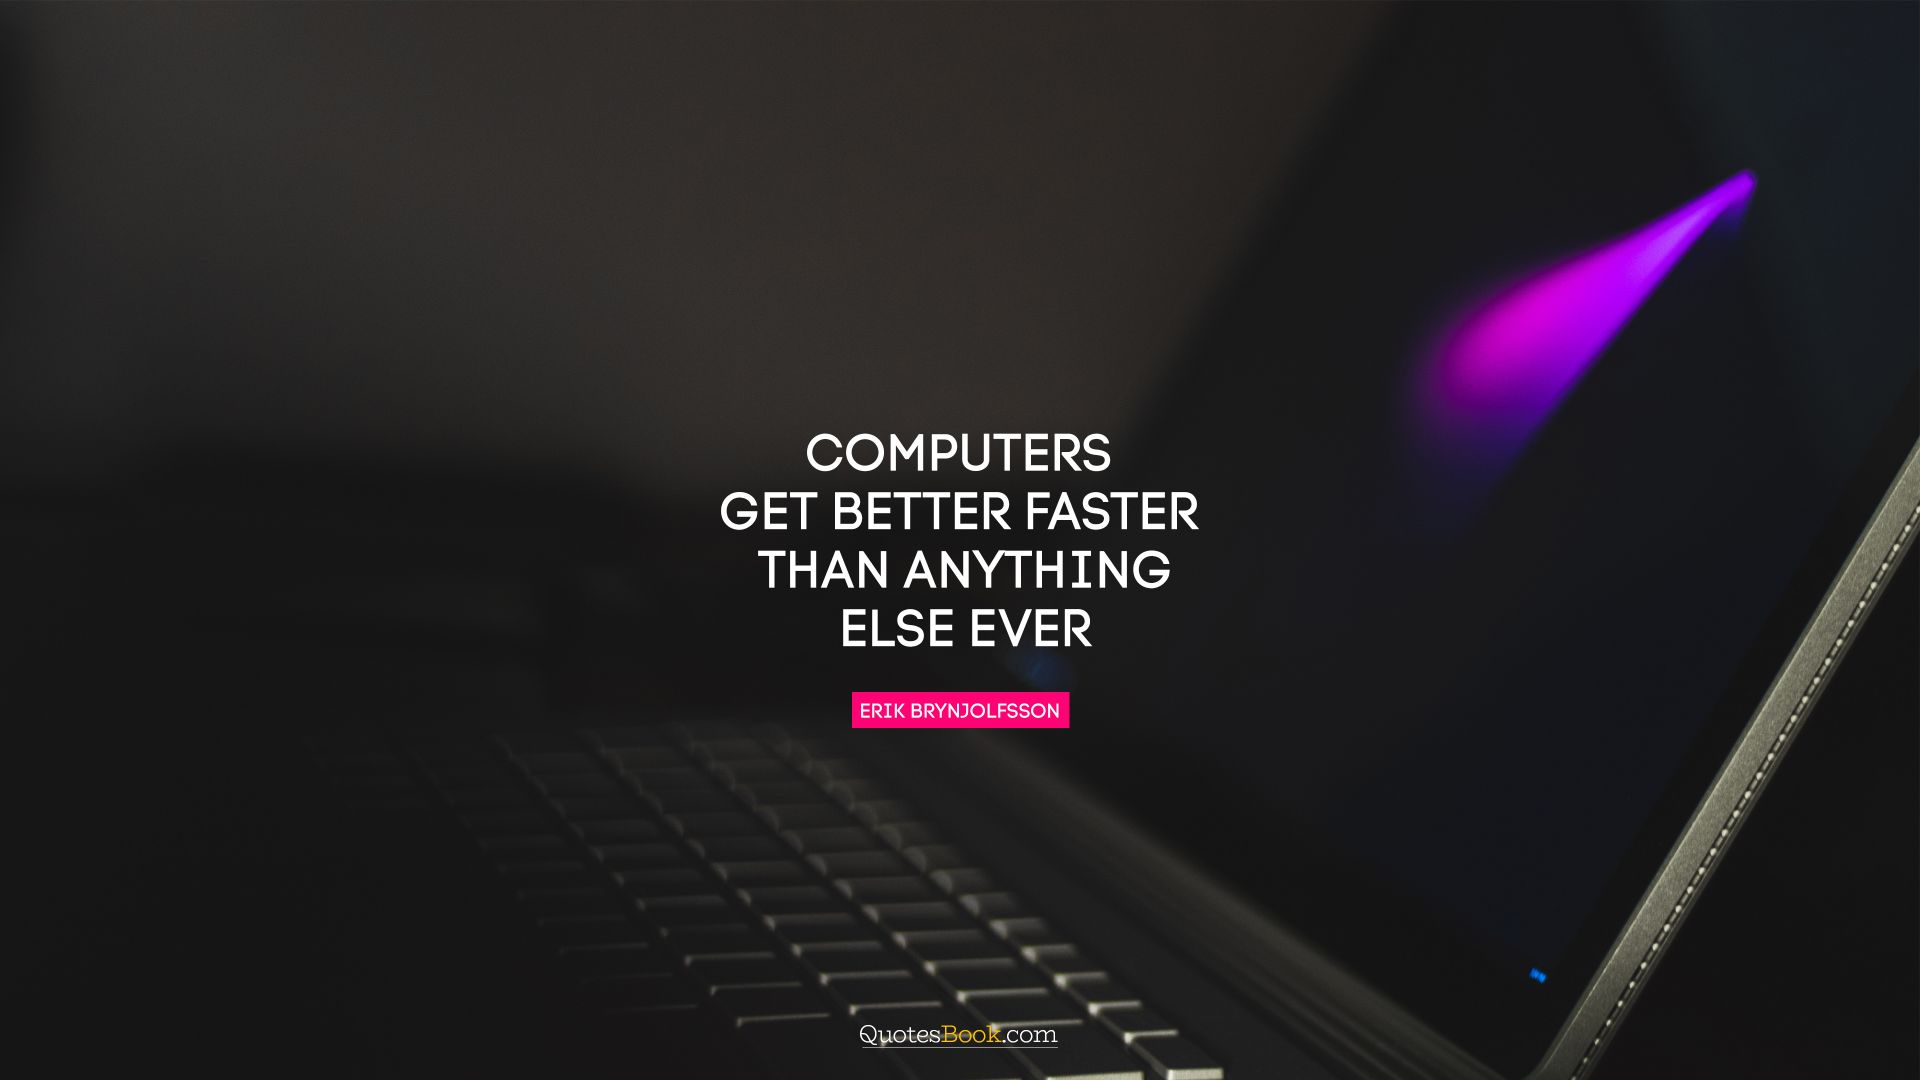 Computers get better faster than anything else ever. - Quote by Erik Brynjolfsson